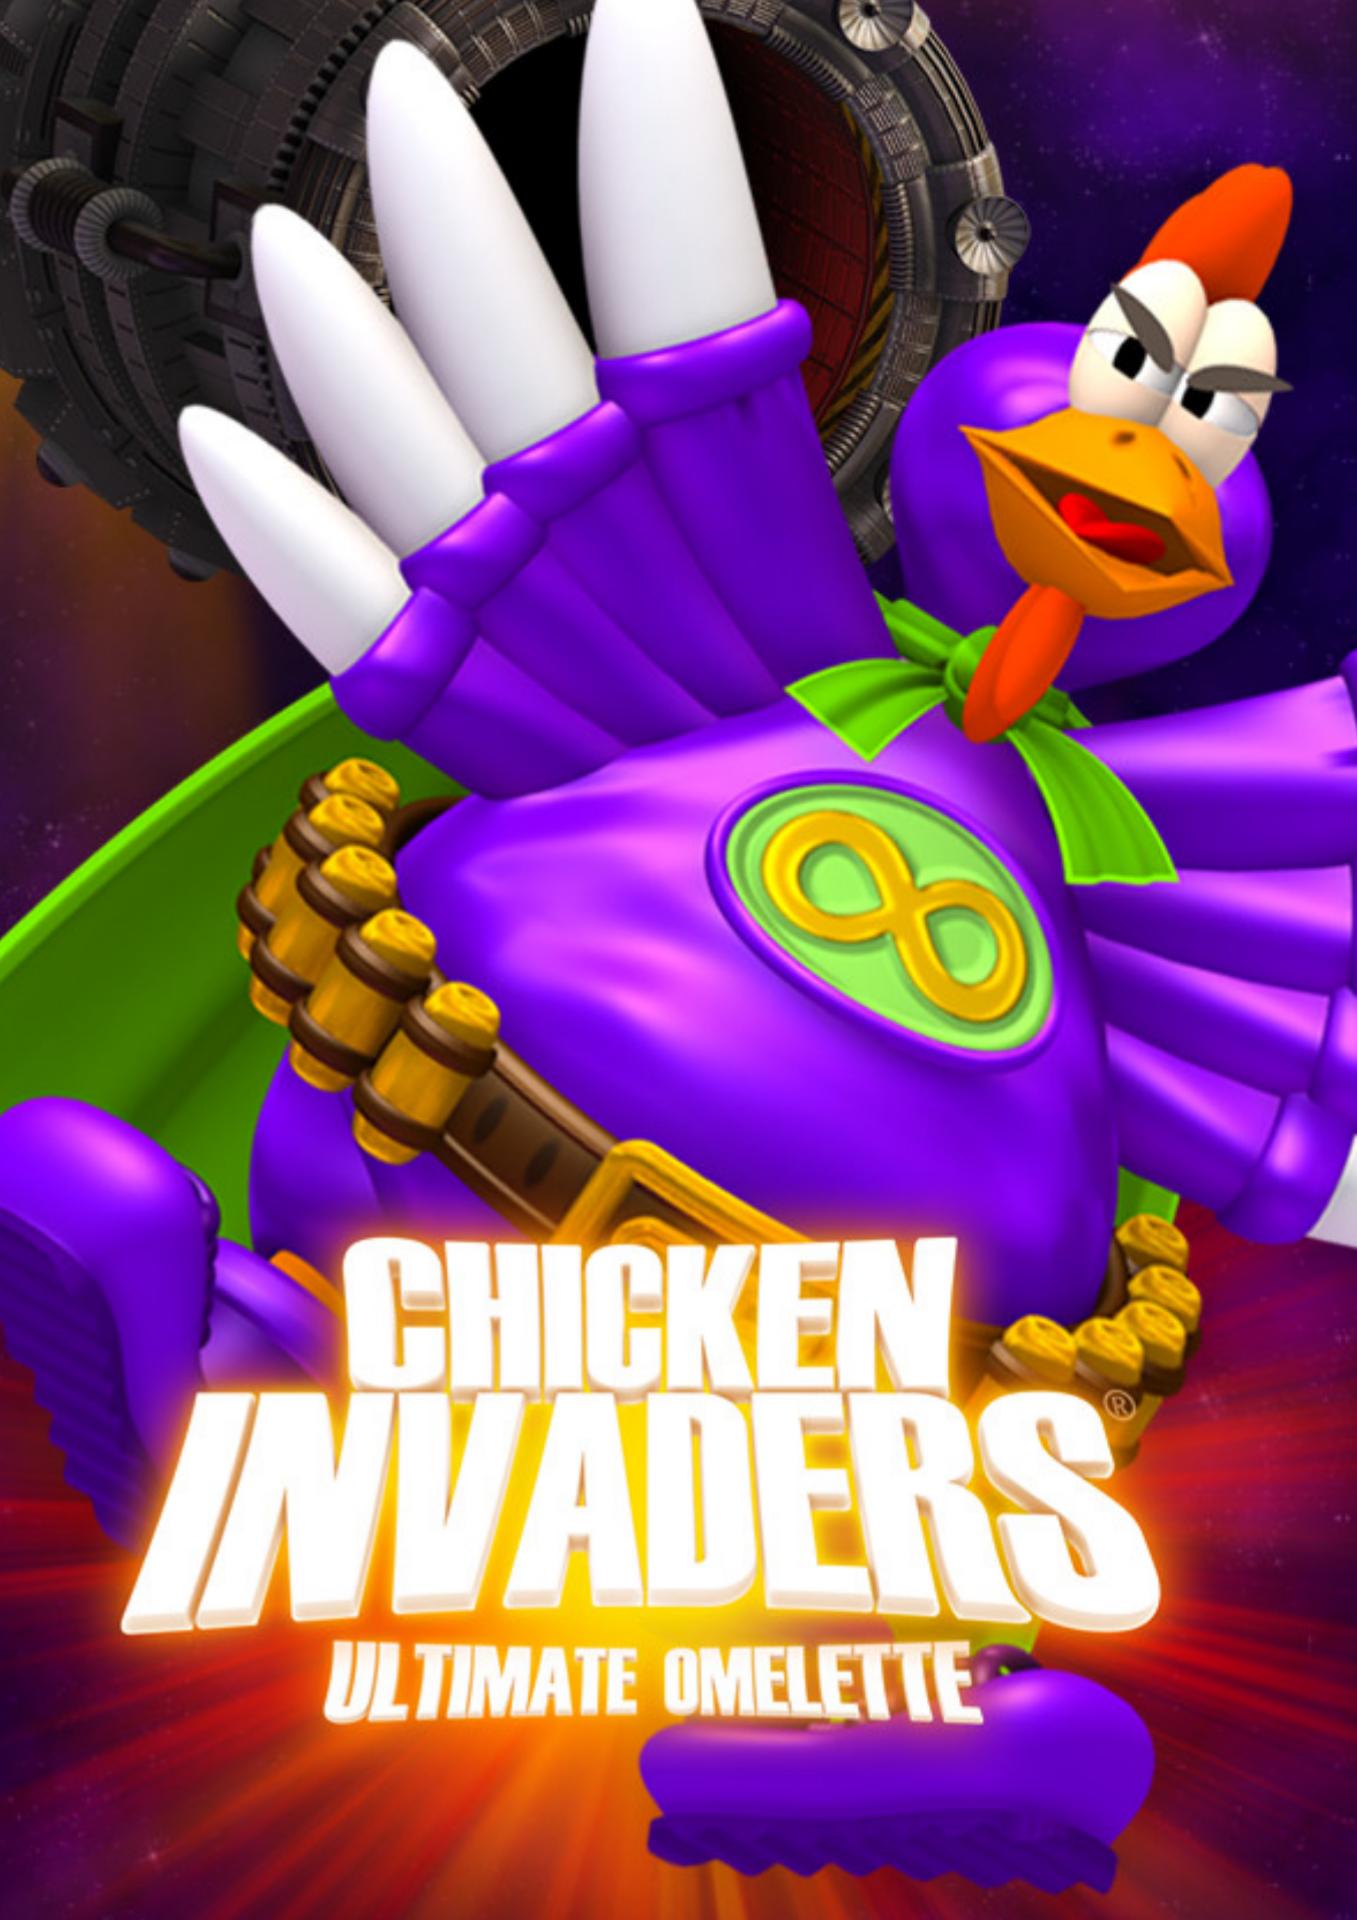 chicken invaders free download full version for windows 7